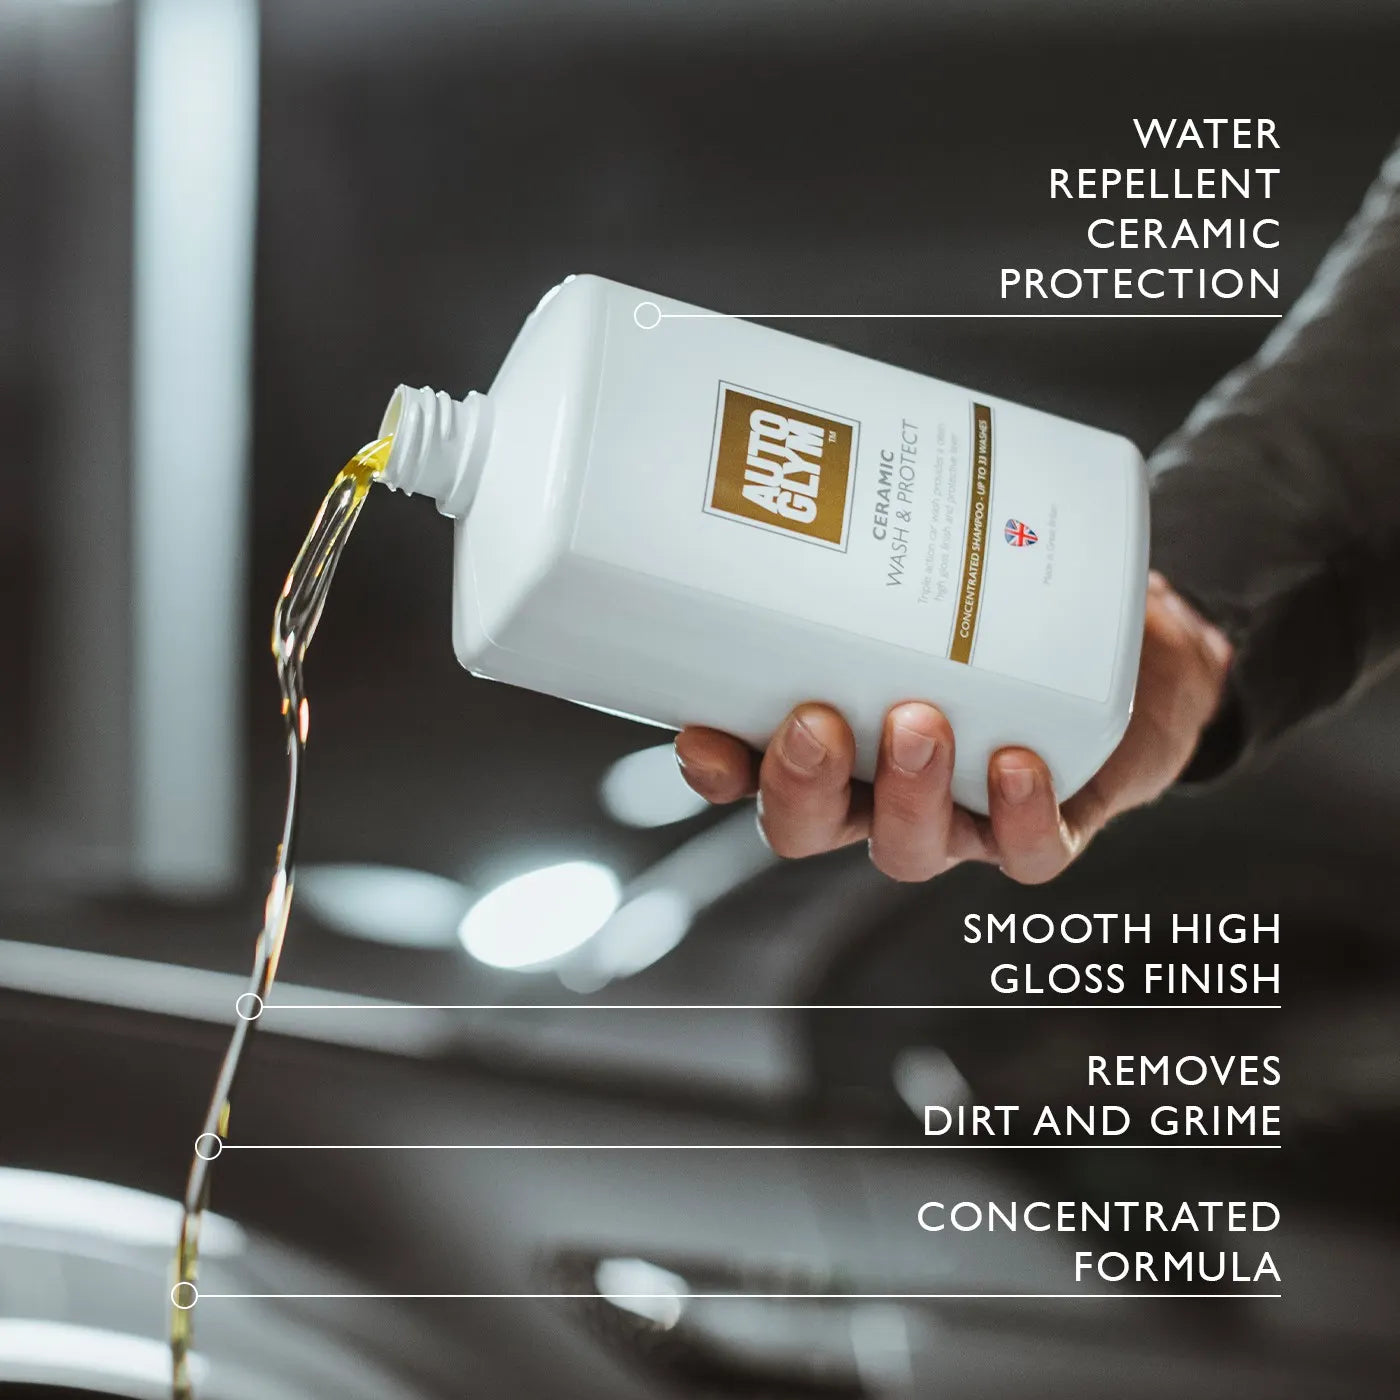 Autoglym Ceramic Shampoo 1L. Autoglym Ireland. A shampoo with triple action benefits. Our Ceramic Wash & Protect delivers a deep clean, and leaves a hydrophobic protective layer, along with a smooth high gloss finish.